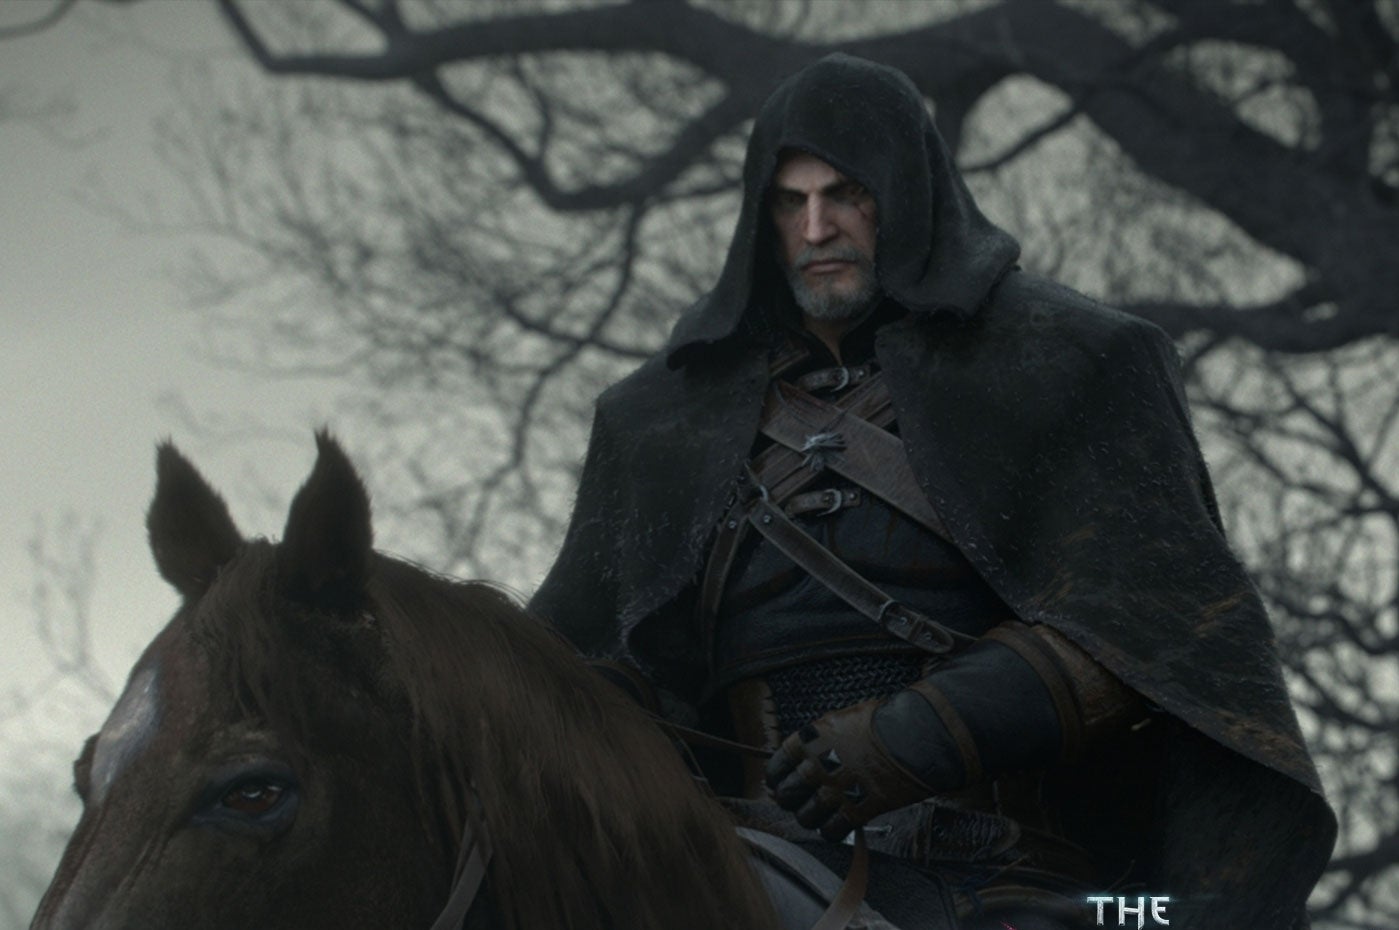 Image for Warner Bros bringing The Witcher 3 to North America